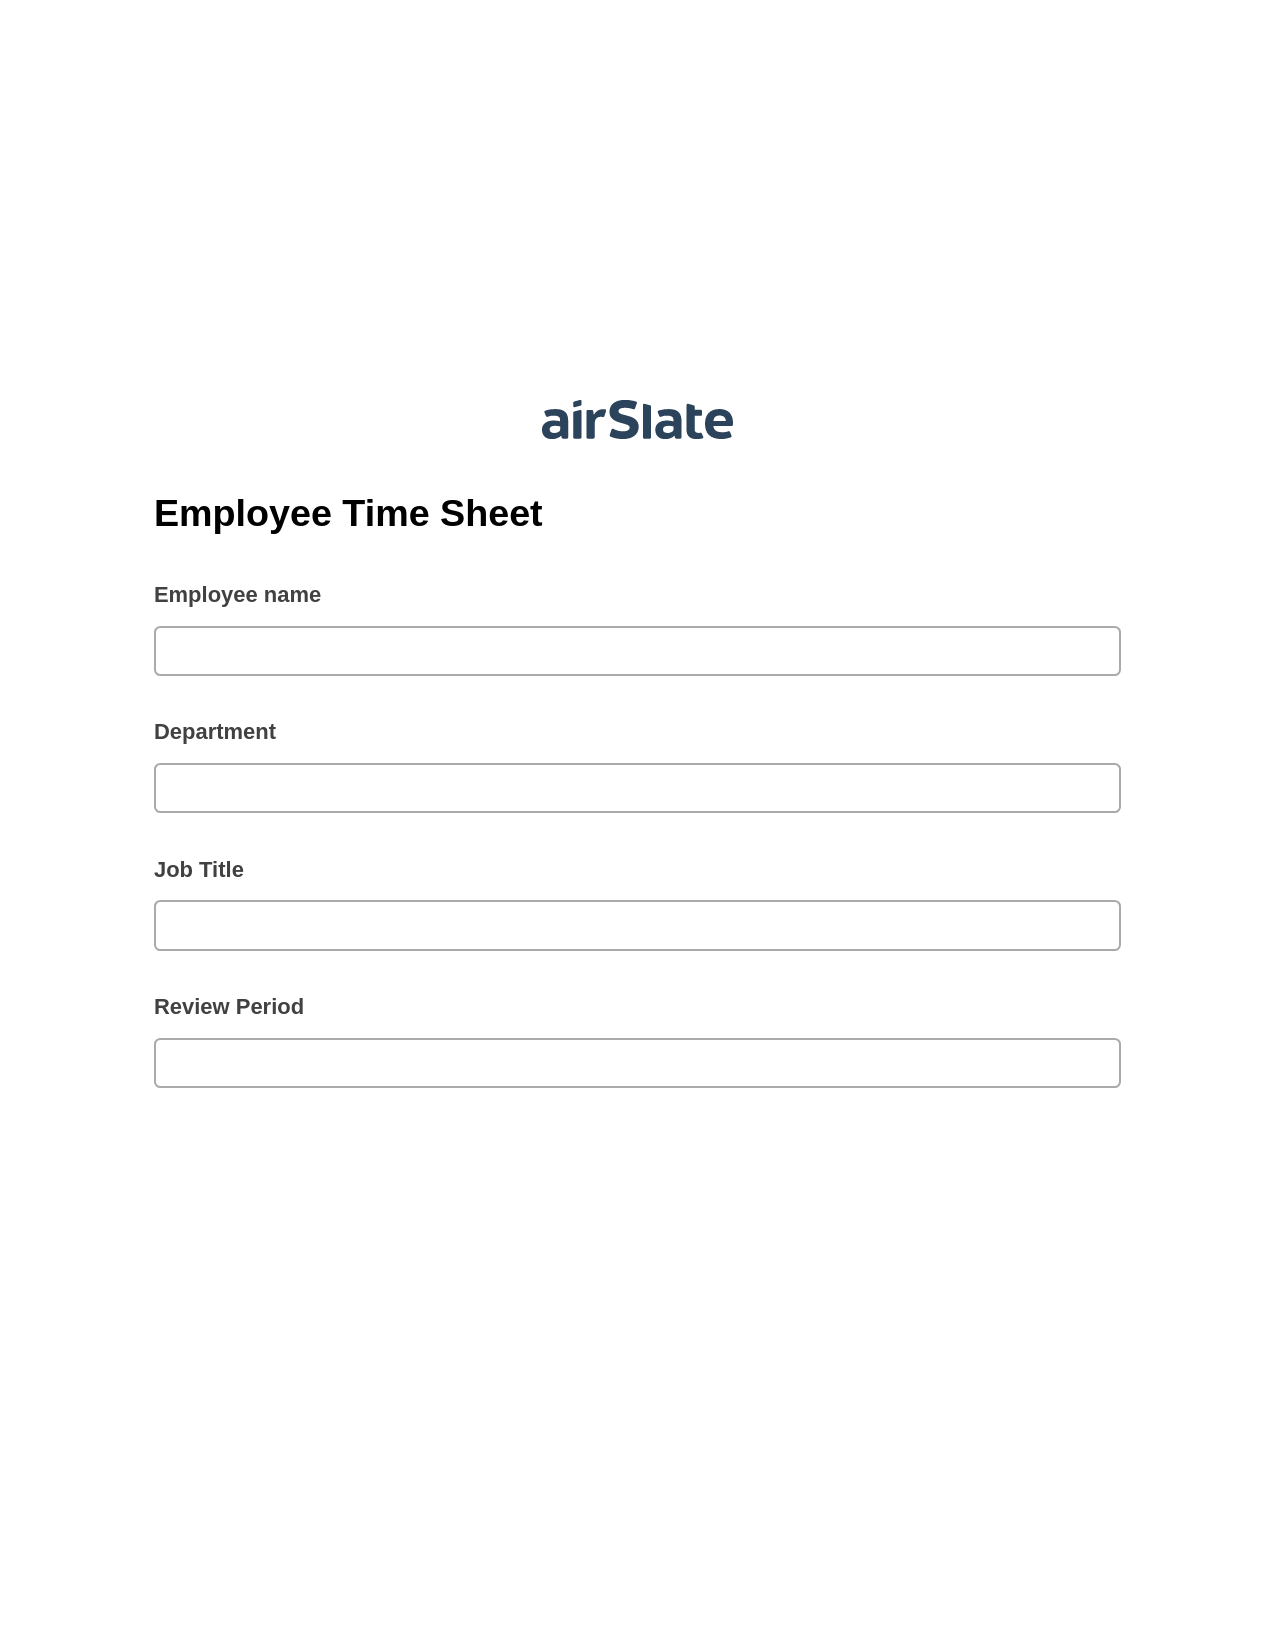 Employee Time Sheet Pre-fill Dropdowns from Airtable, Webhook Bot, Export to NetSuite Bot